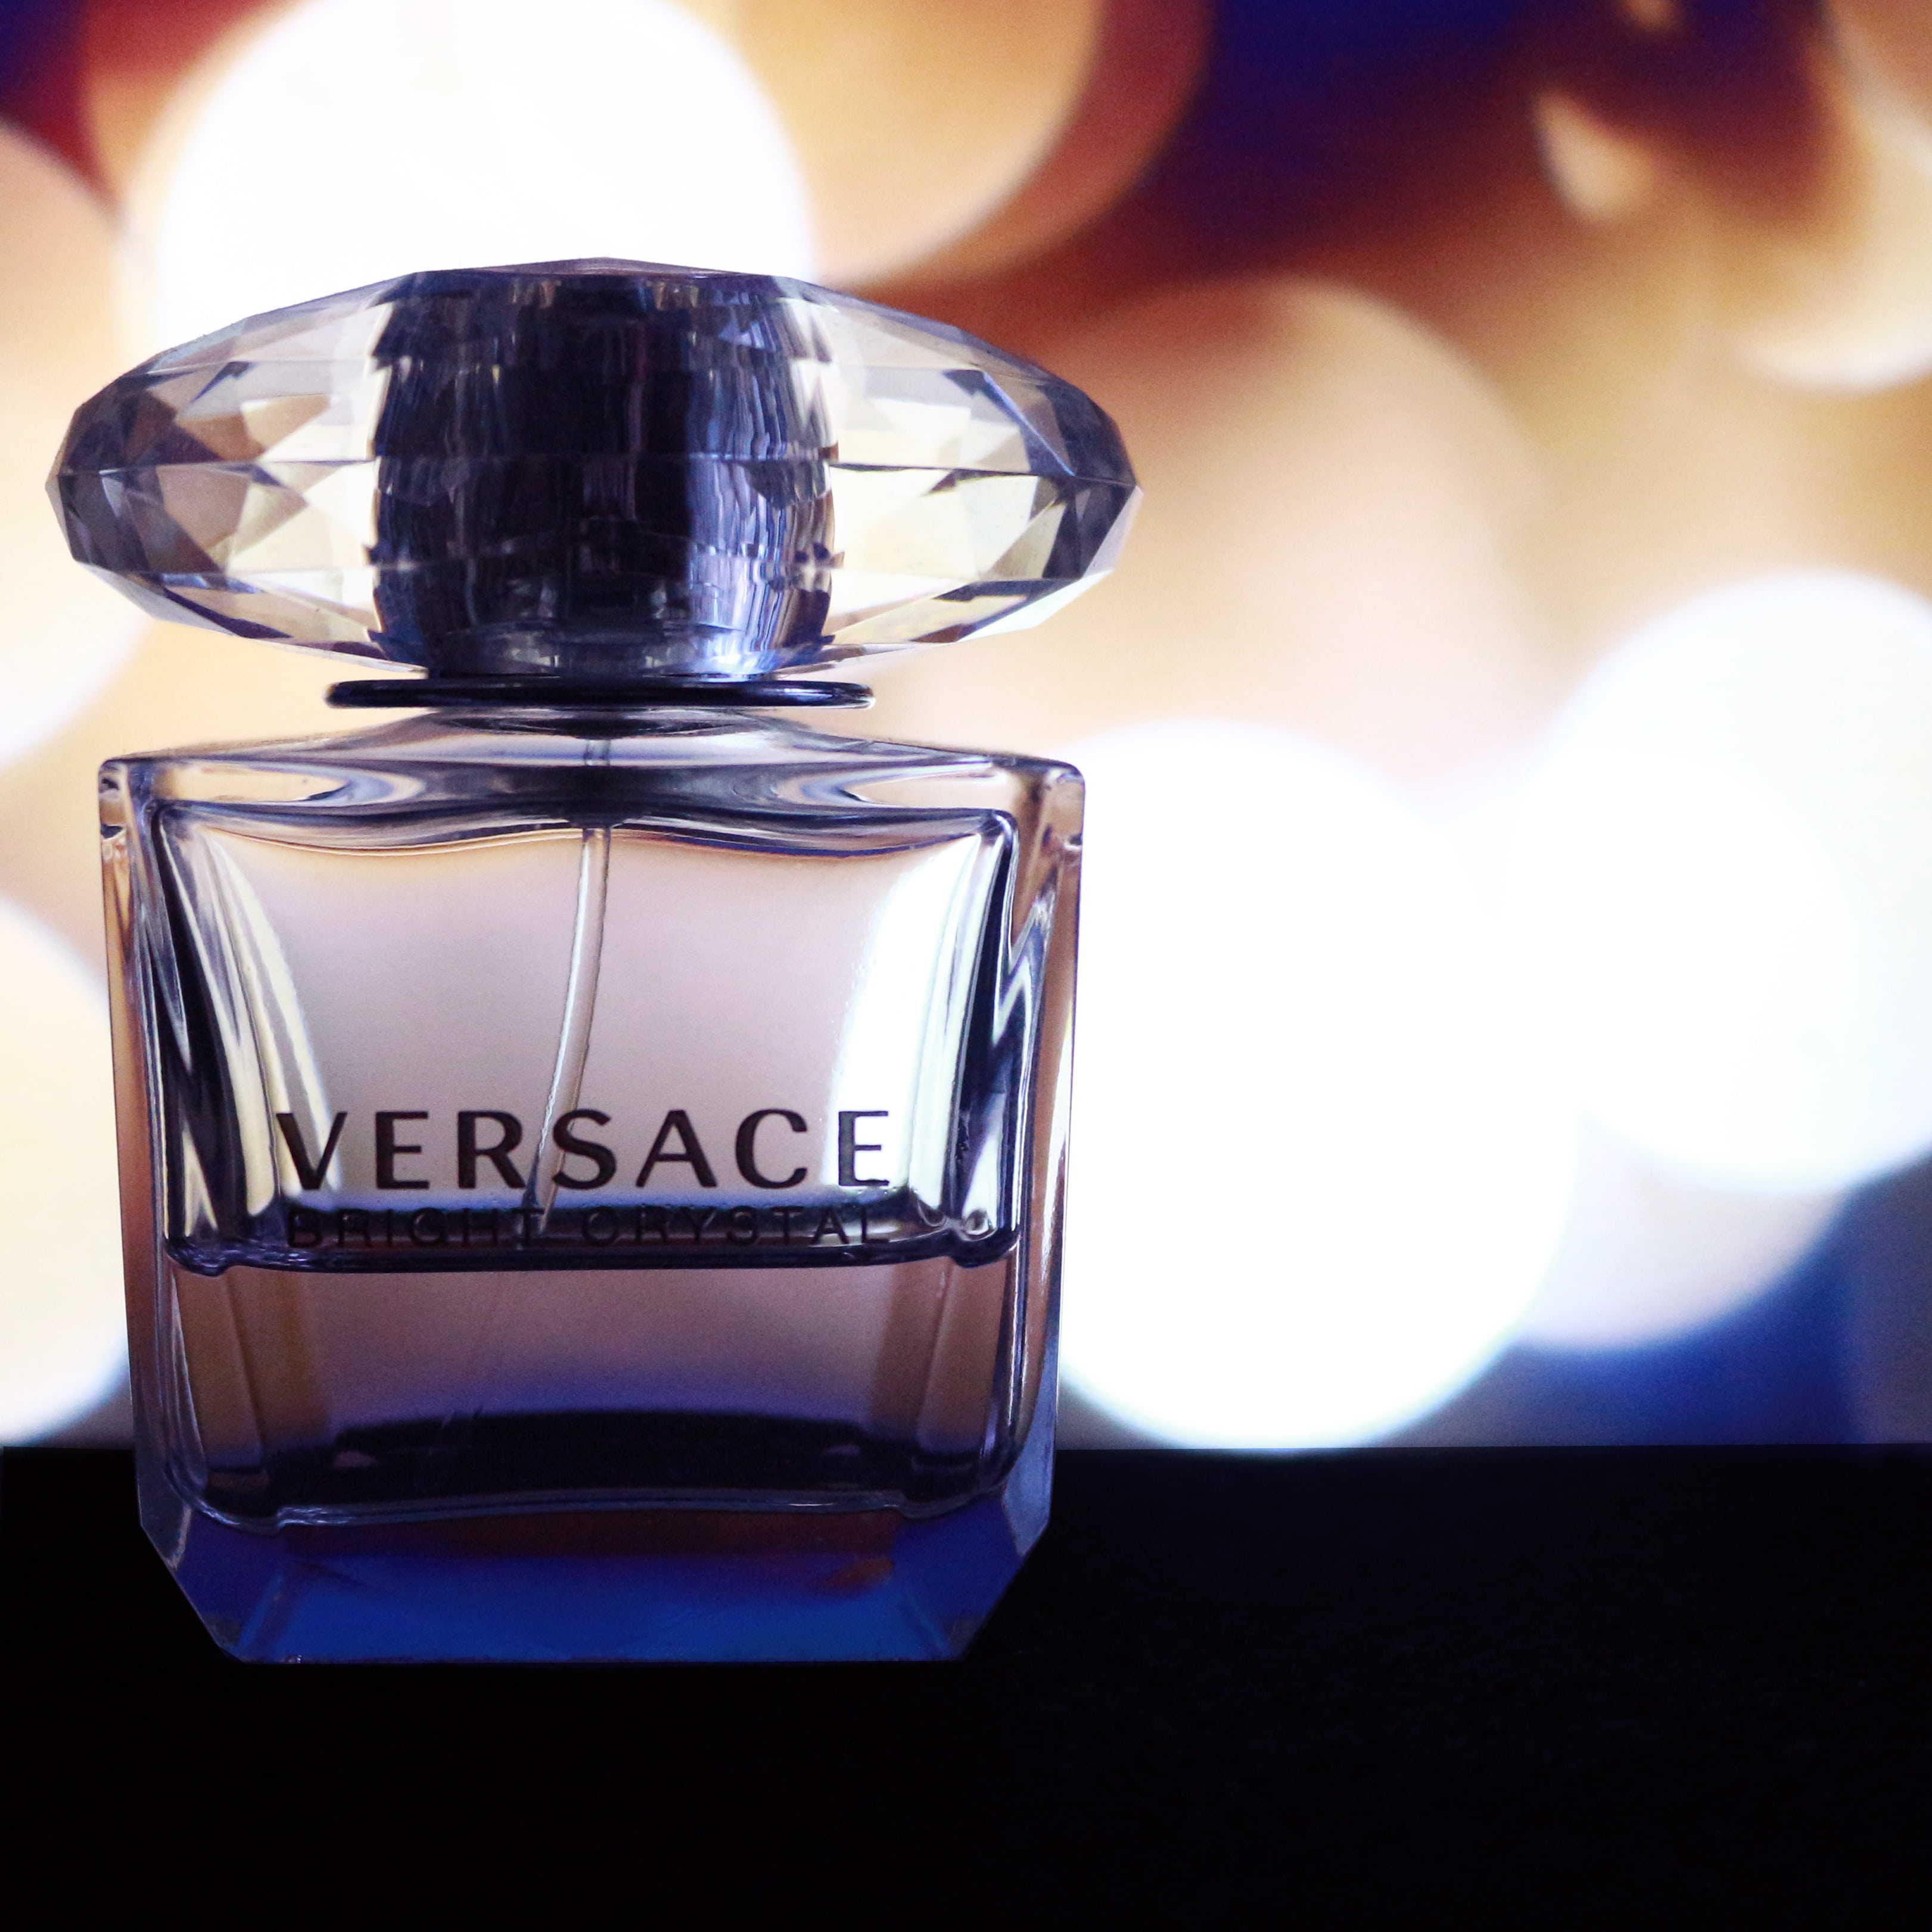 focus photography of Versace fragrance bottle, perfume, product